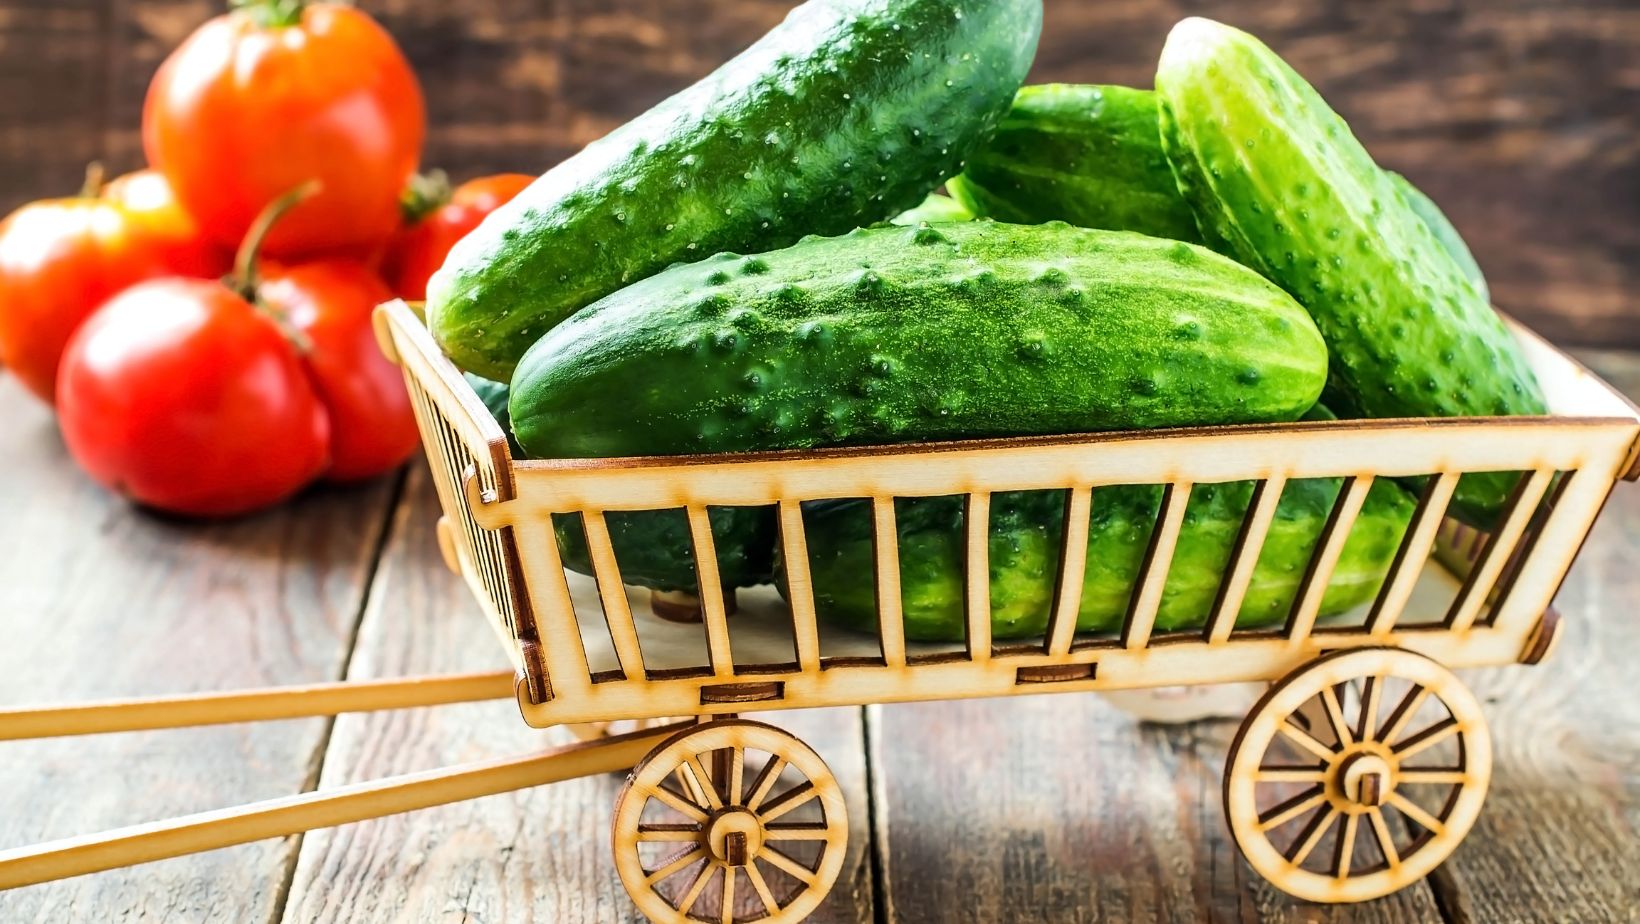 are cucumbers good for keto